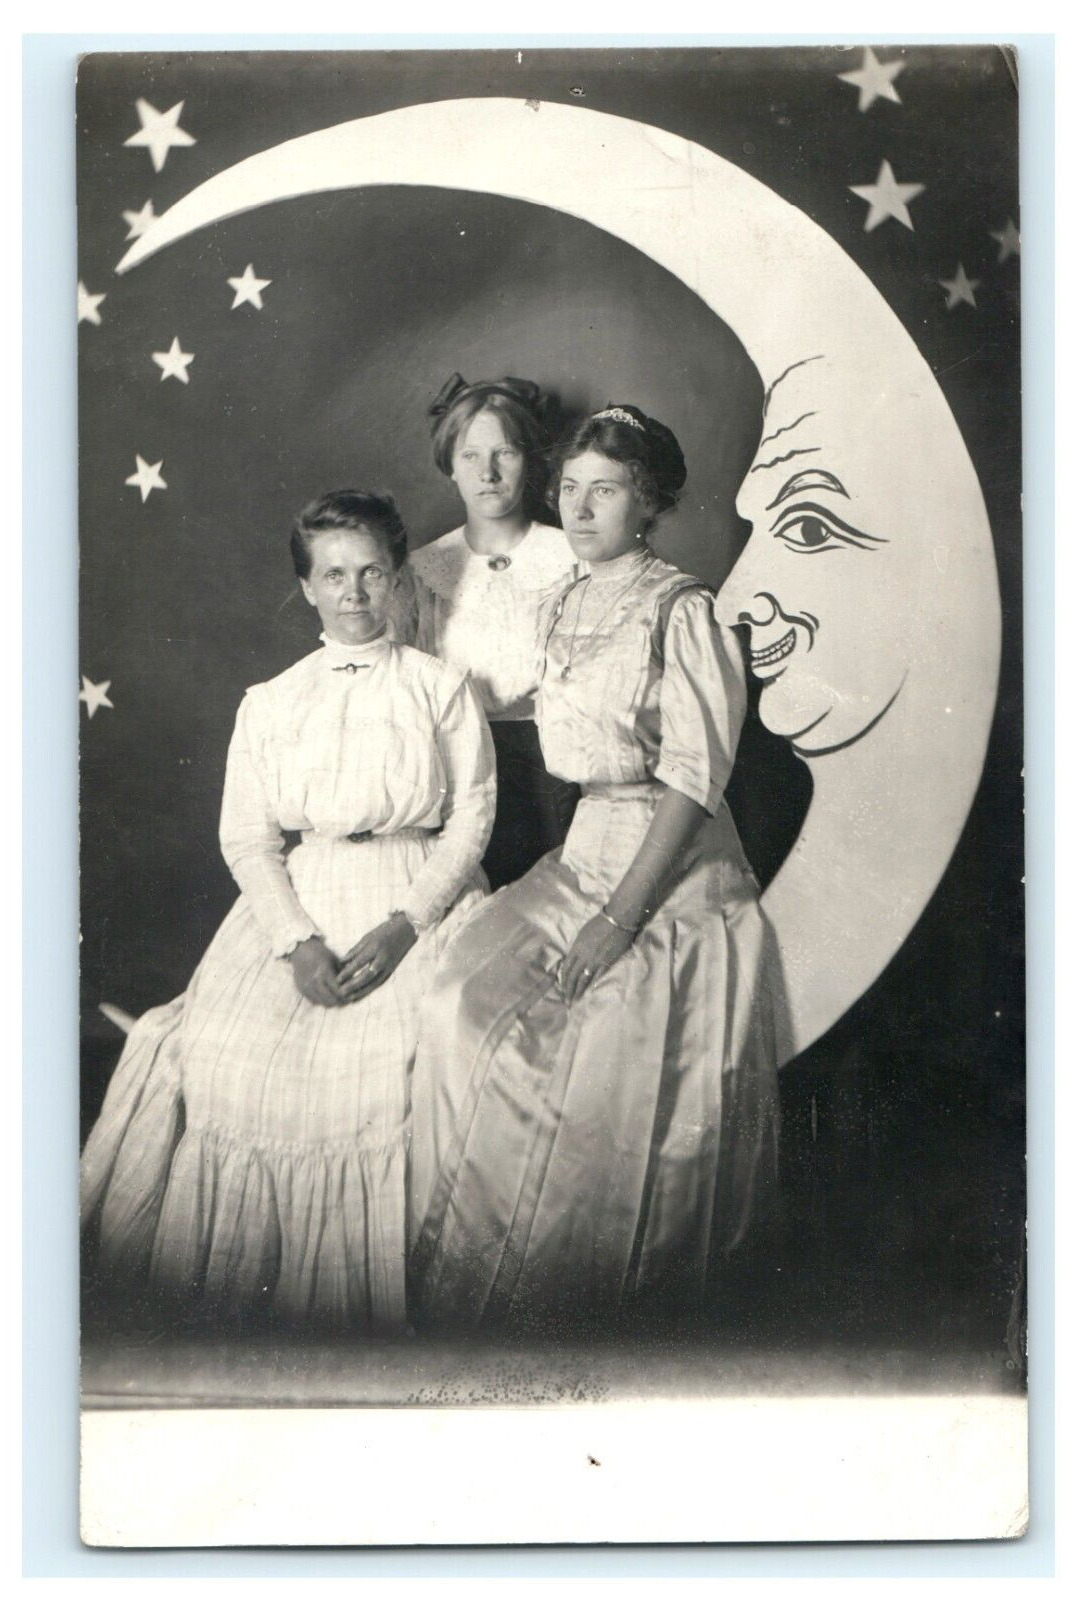 Lovely Girls Woman Paper Moon RPPC Studio Image Early View Stars